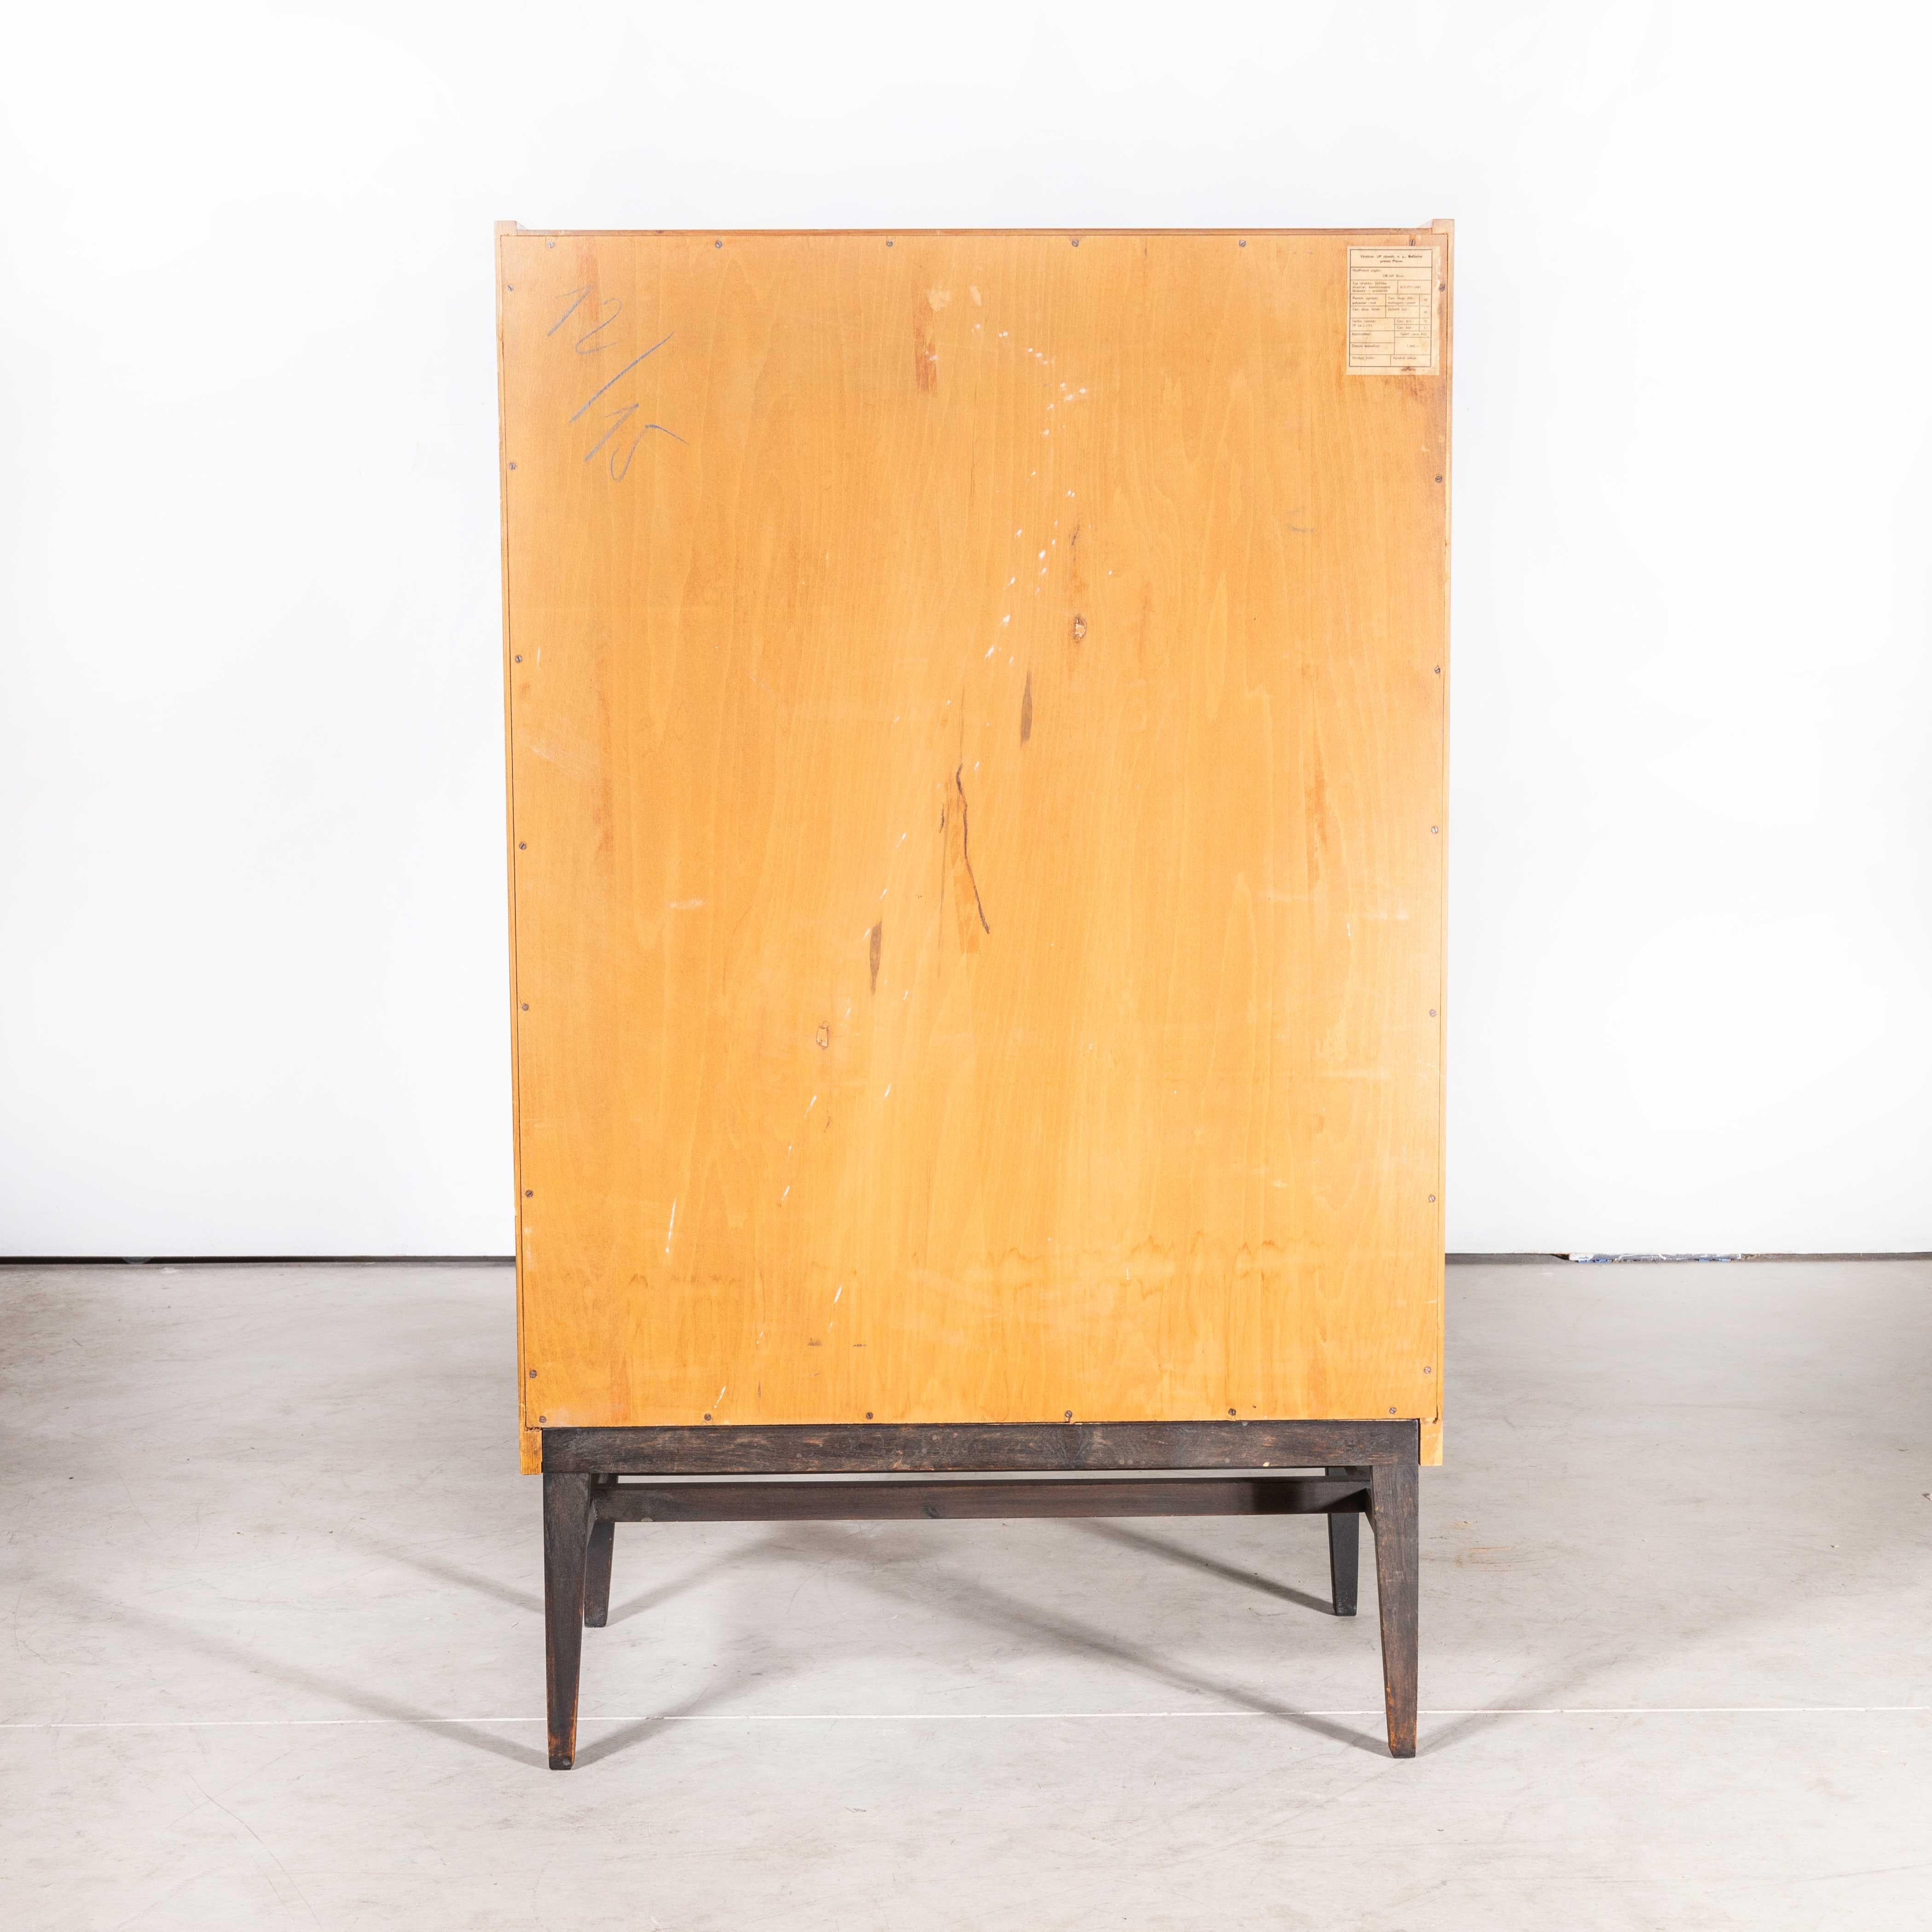 1970s Good Sized midcentury Cabinet – Up Zavody
1970s Good Sized midcentury Cabinet – Up Zavody. Superb practical piece of midcentury storage by the Czech maker Up Zavody and designed by Frantisek Mezulanik. Czech was a large producer of high